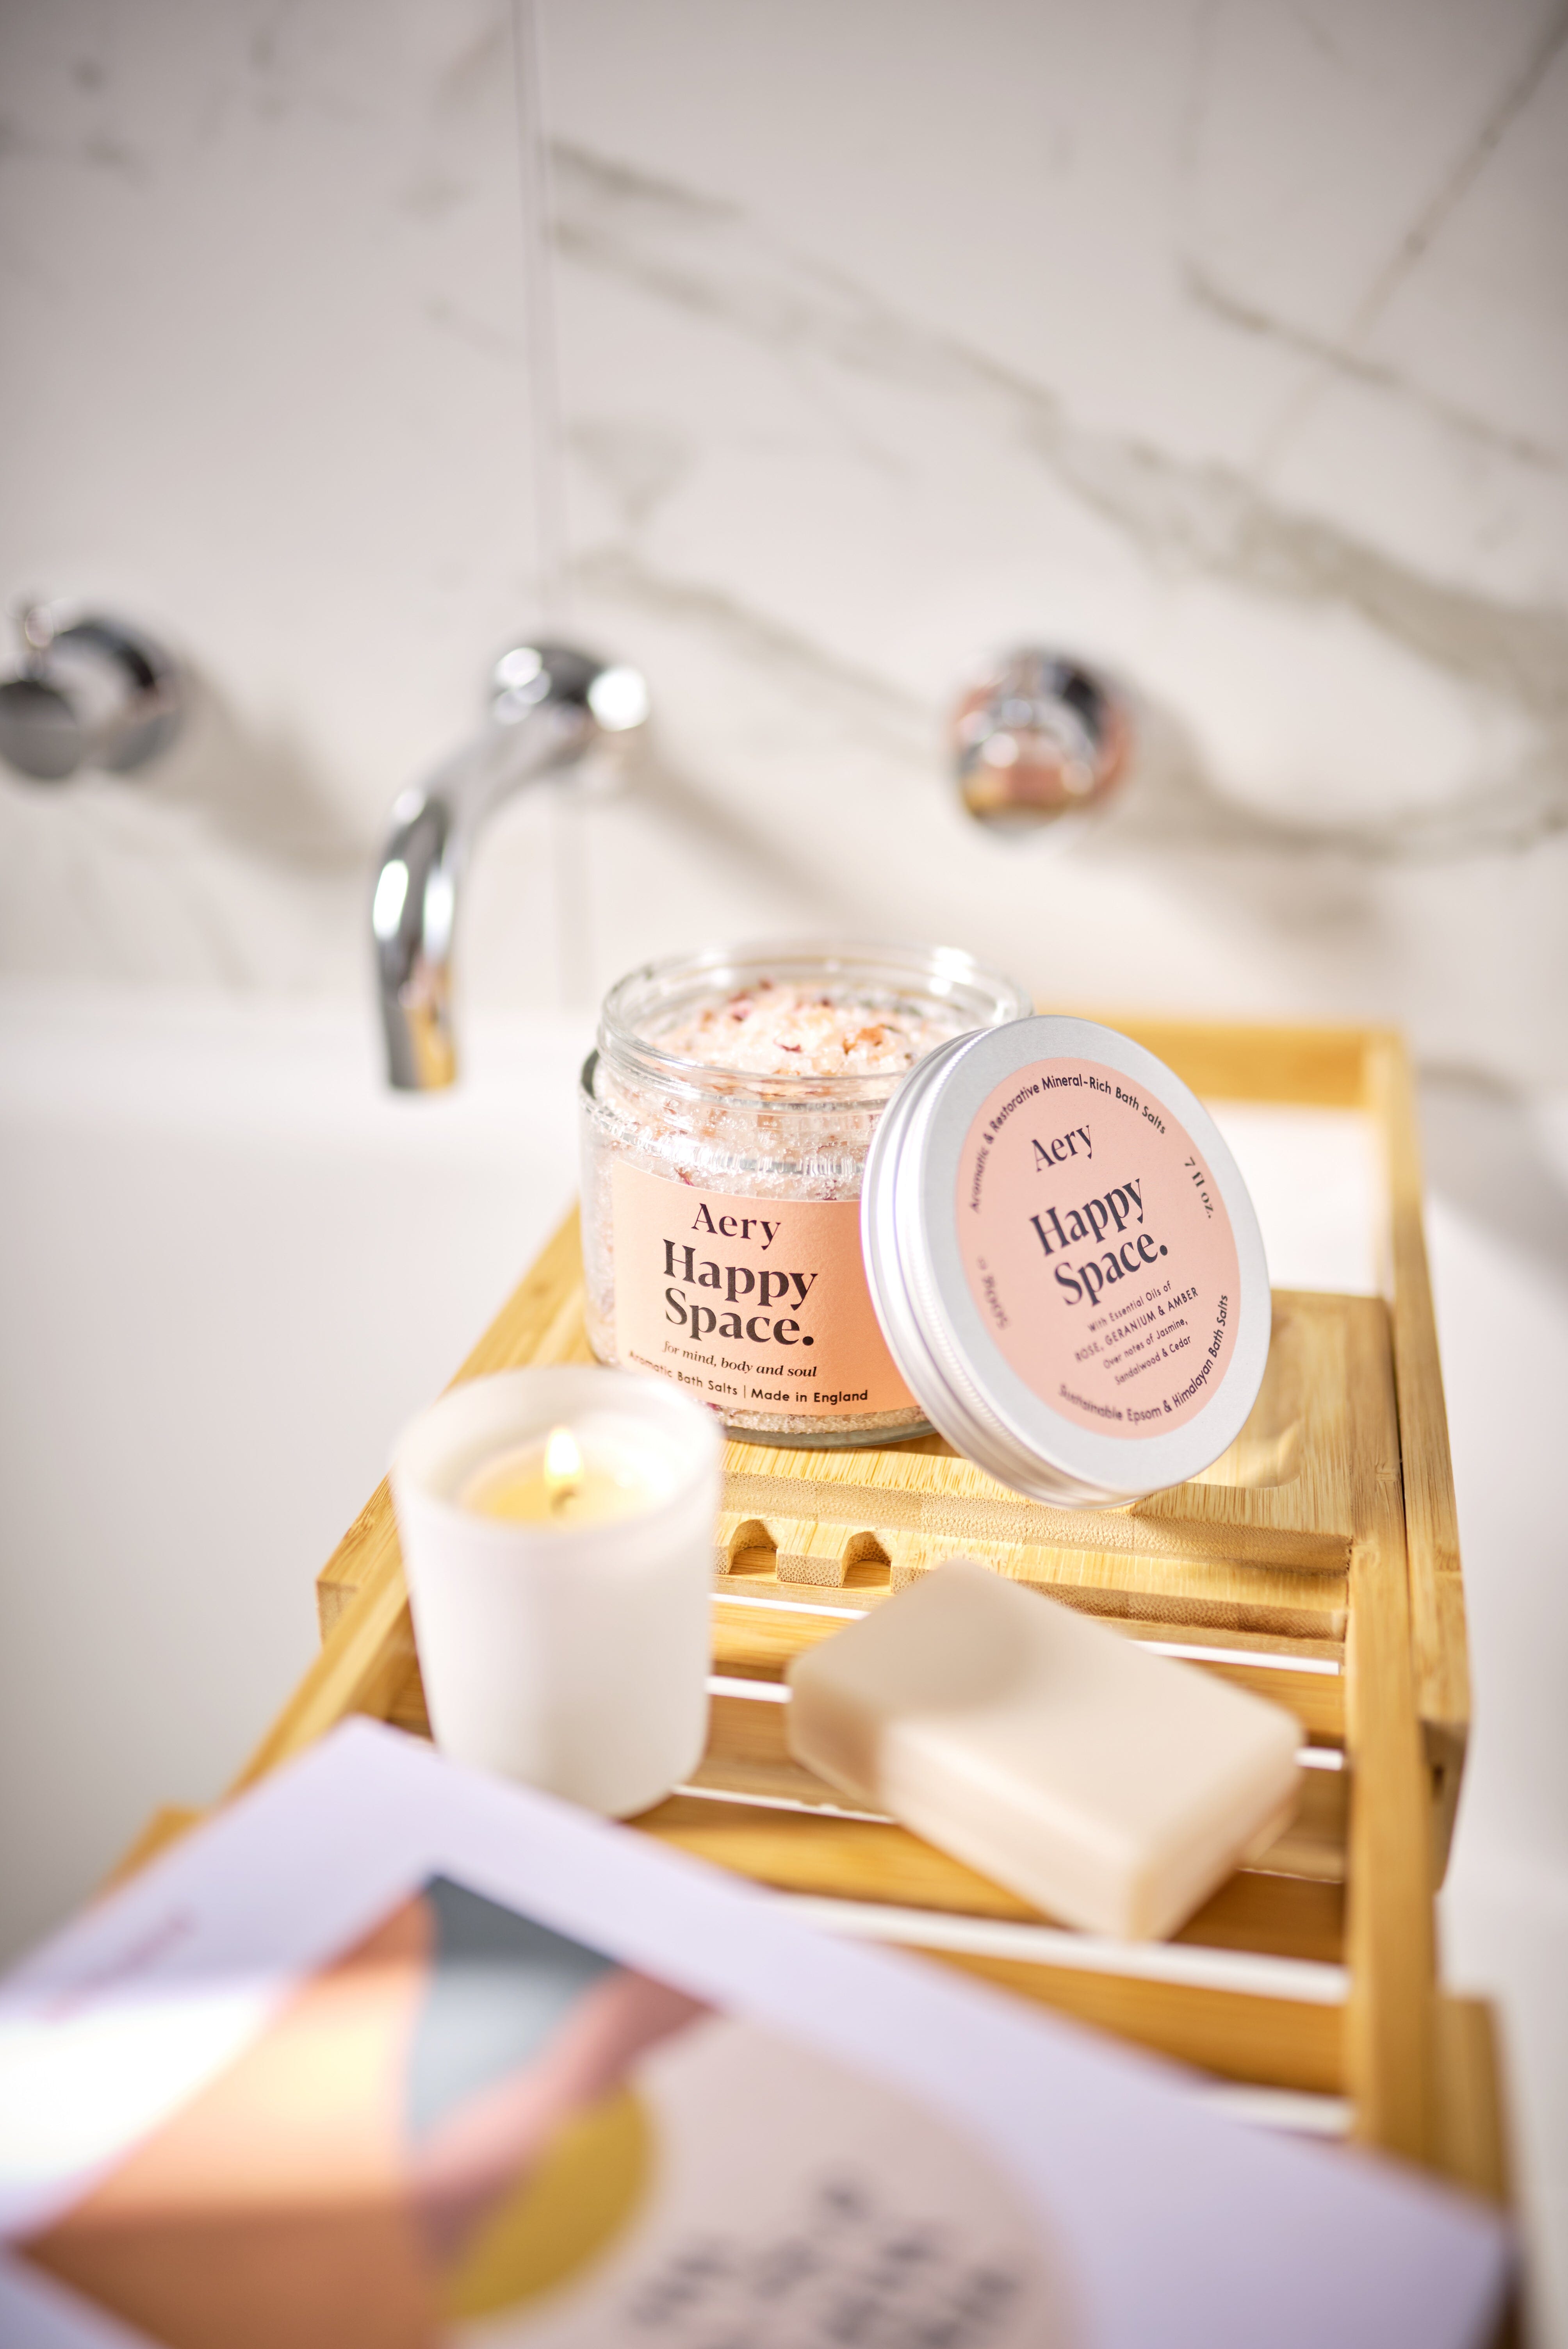 Pink Happy Space baths salts jar by Aery displayed next to soap bar and mini candle on wooden bath tray in bathroom 